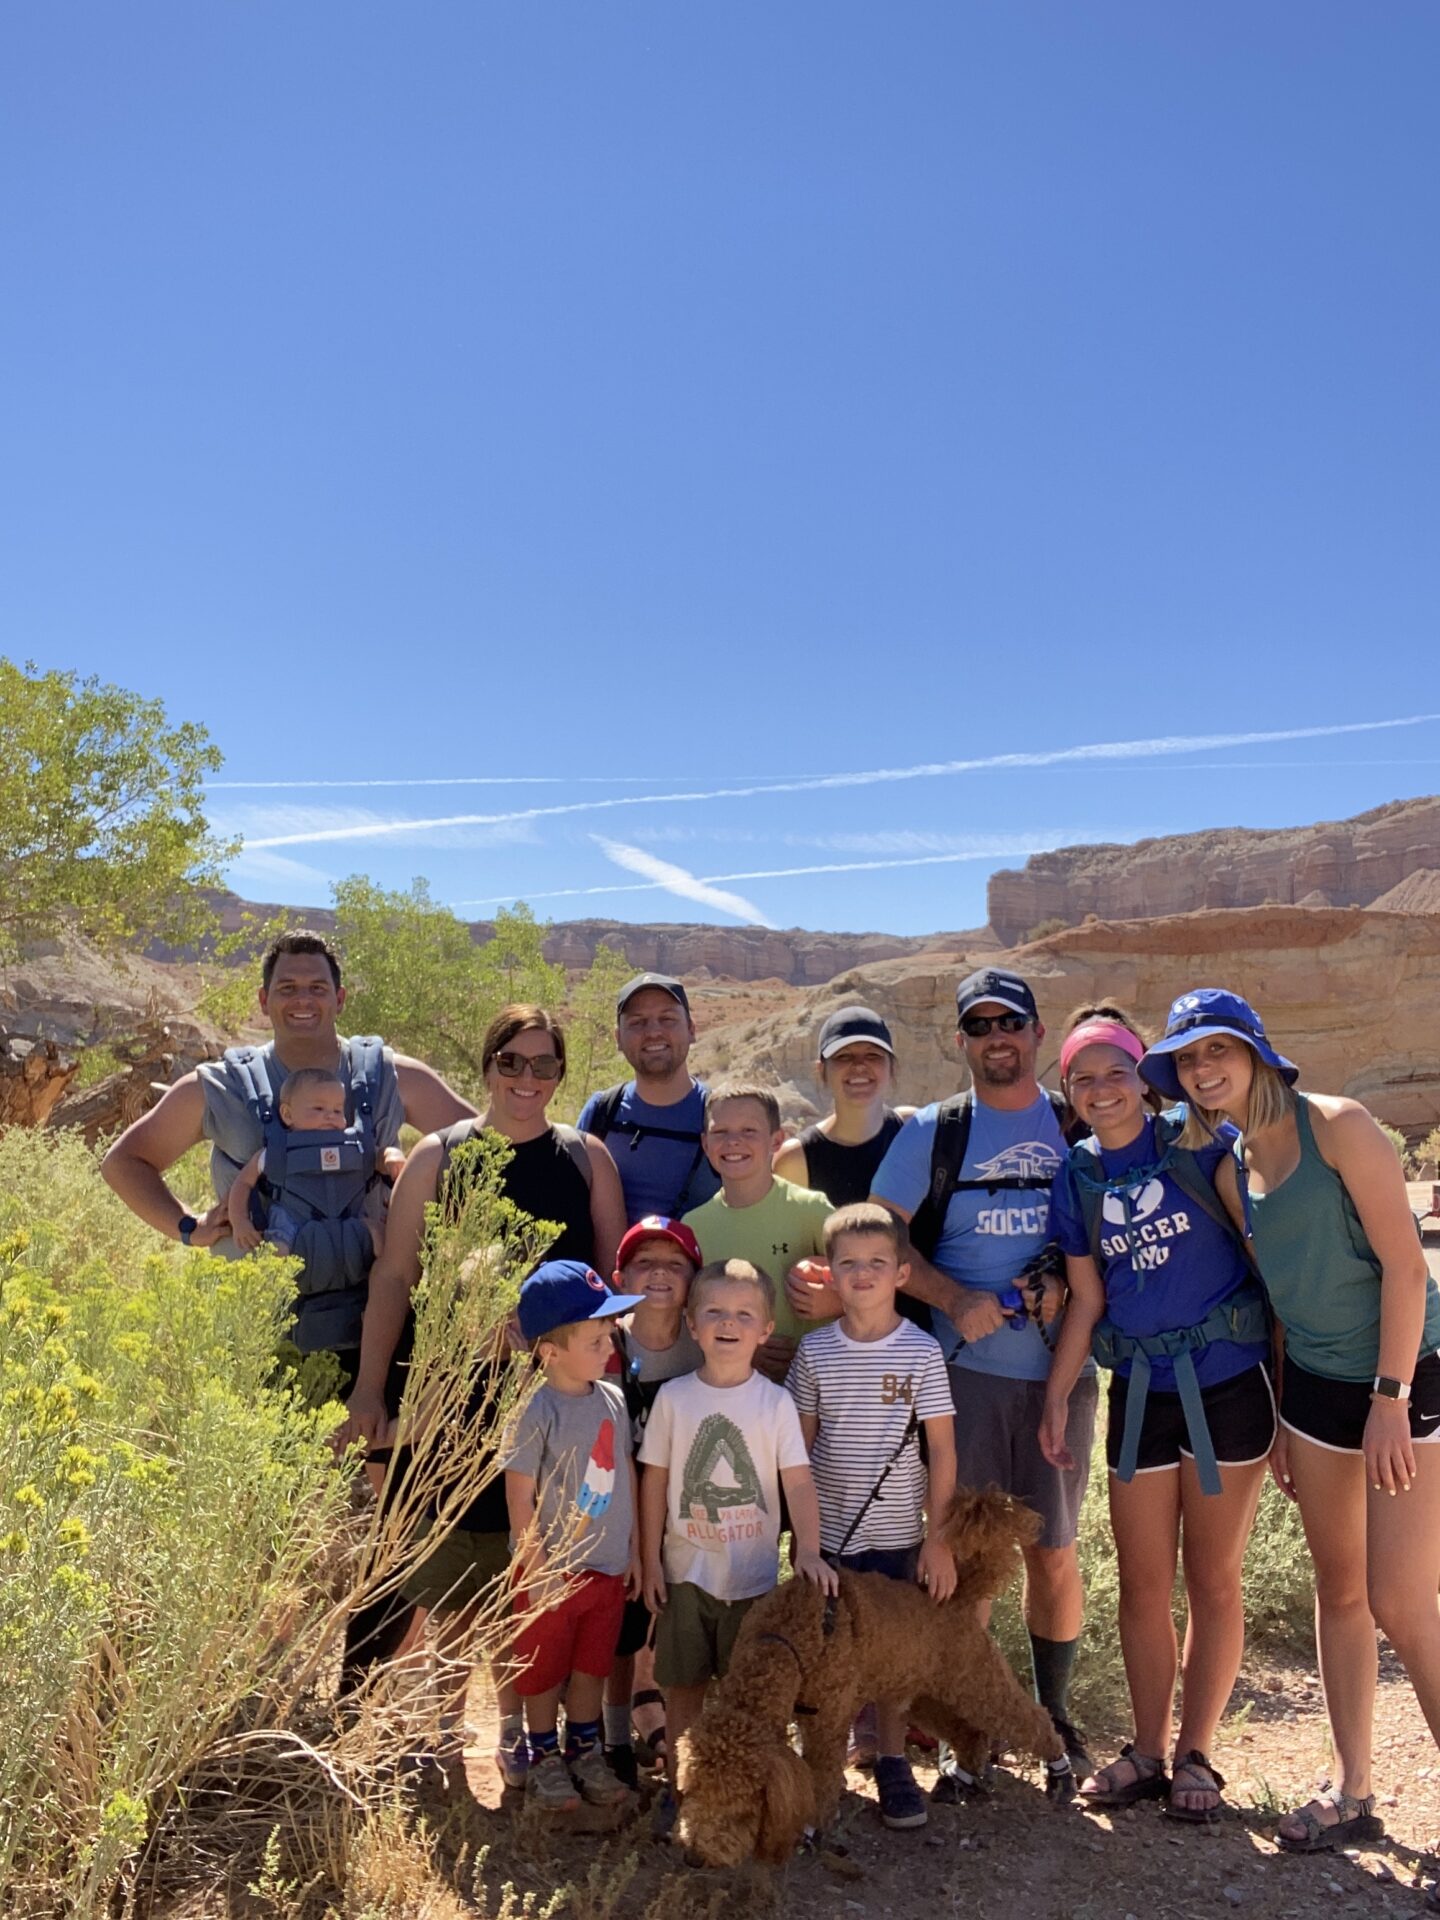 100 Family-Friendly Hikes to Explore the Natural Wonders of Utah